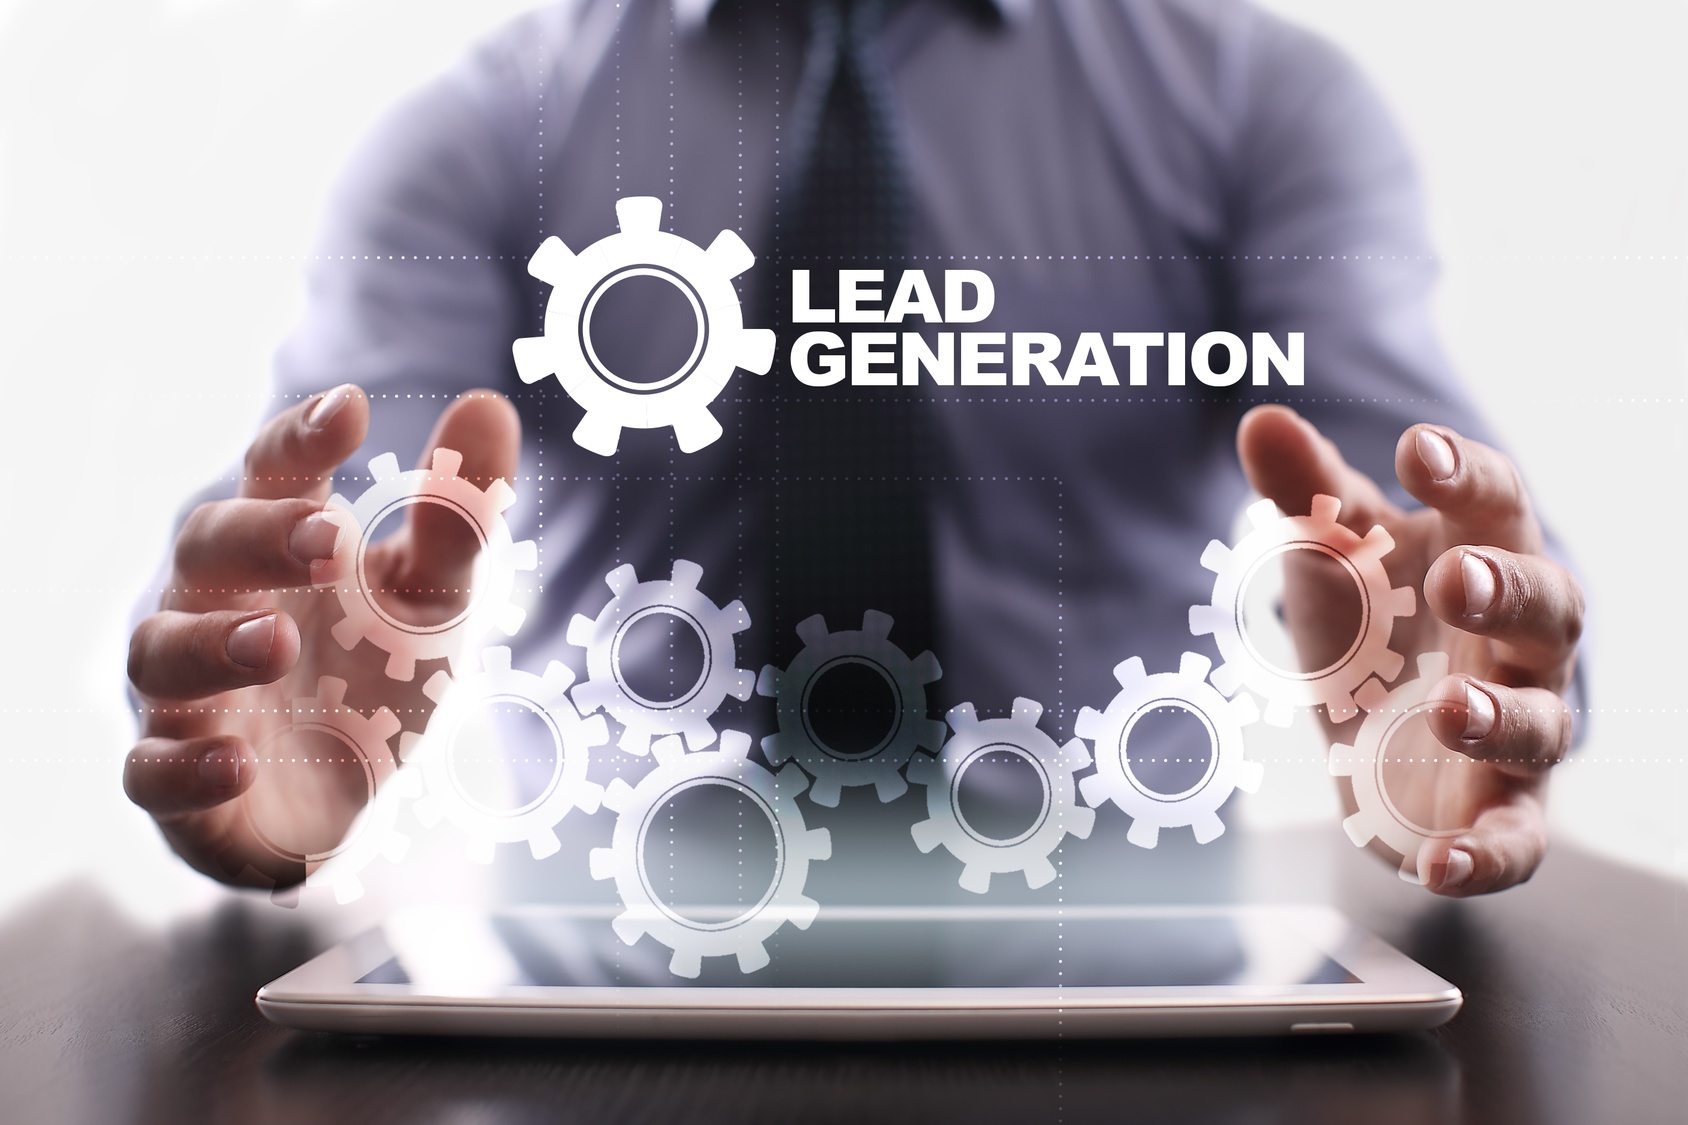 How to Link Social Media to Lead Generation